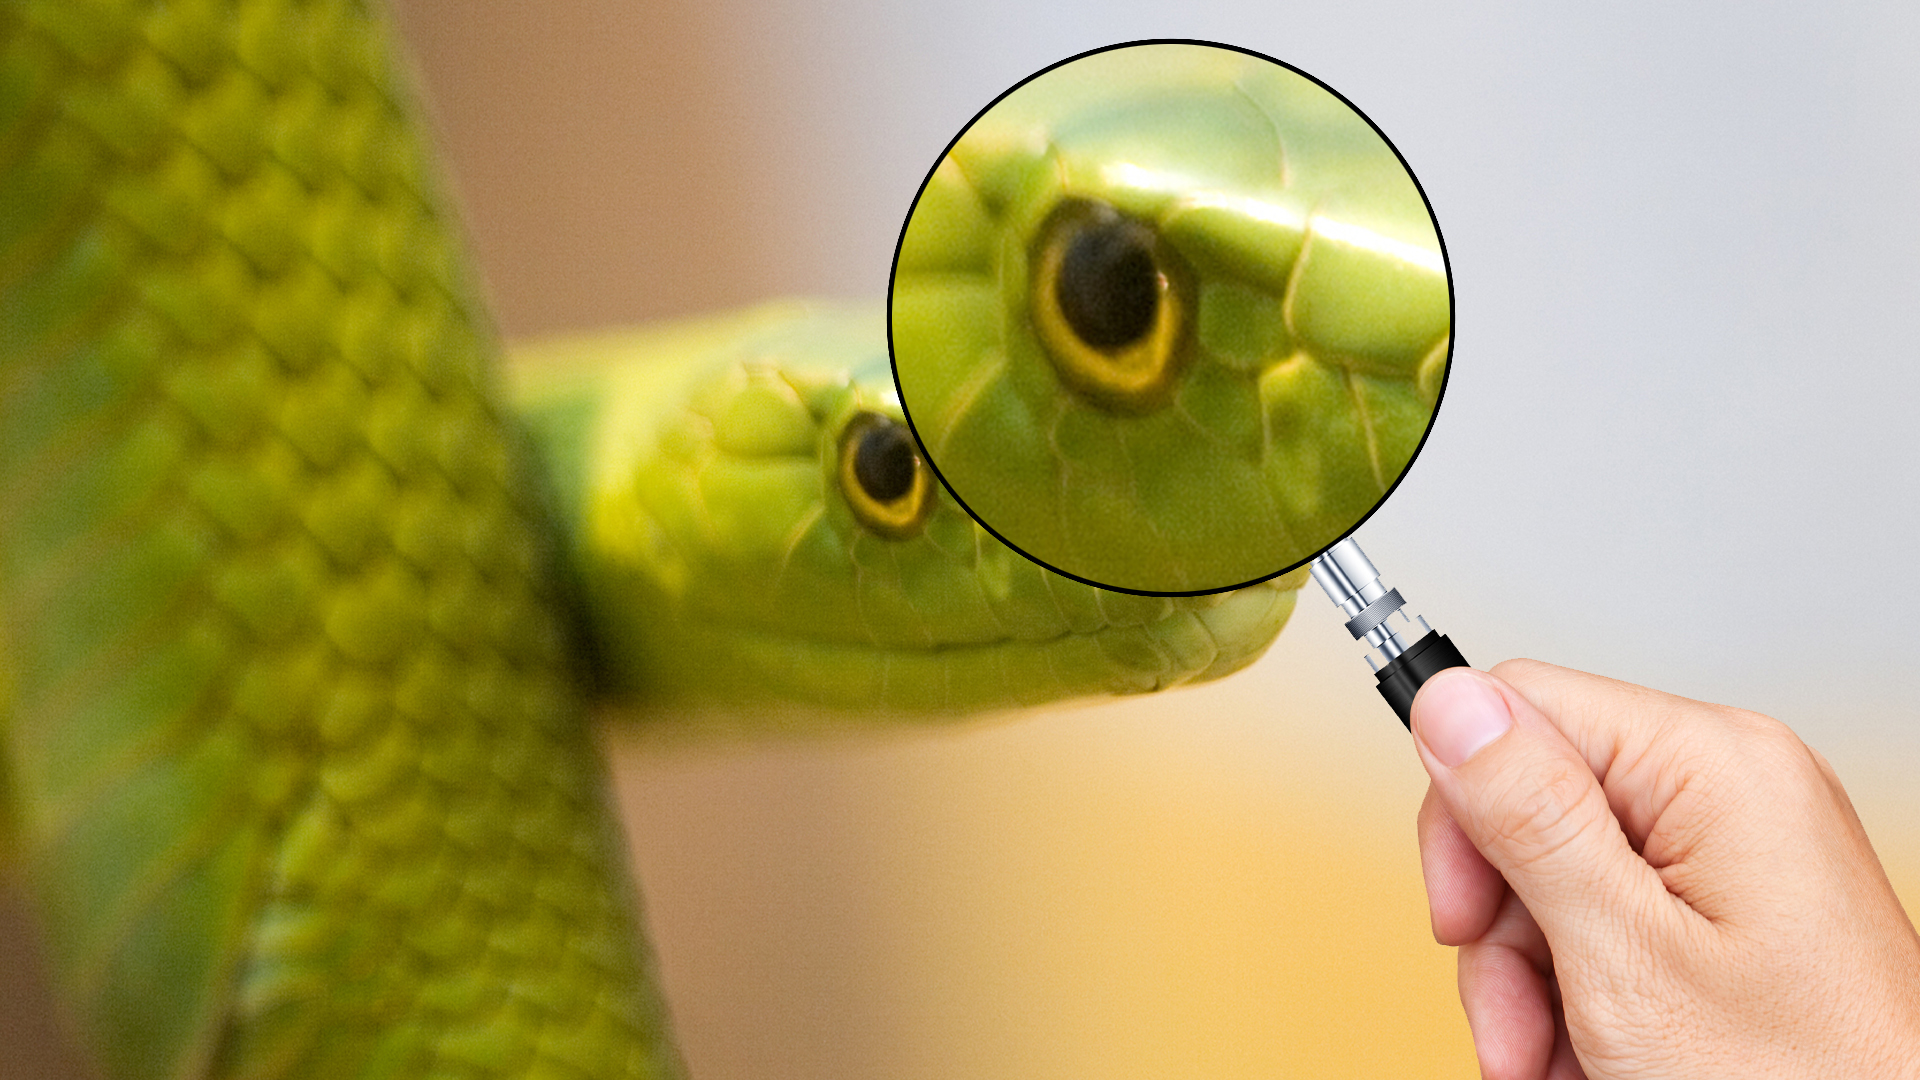 A snake under a magnifying glass